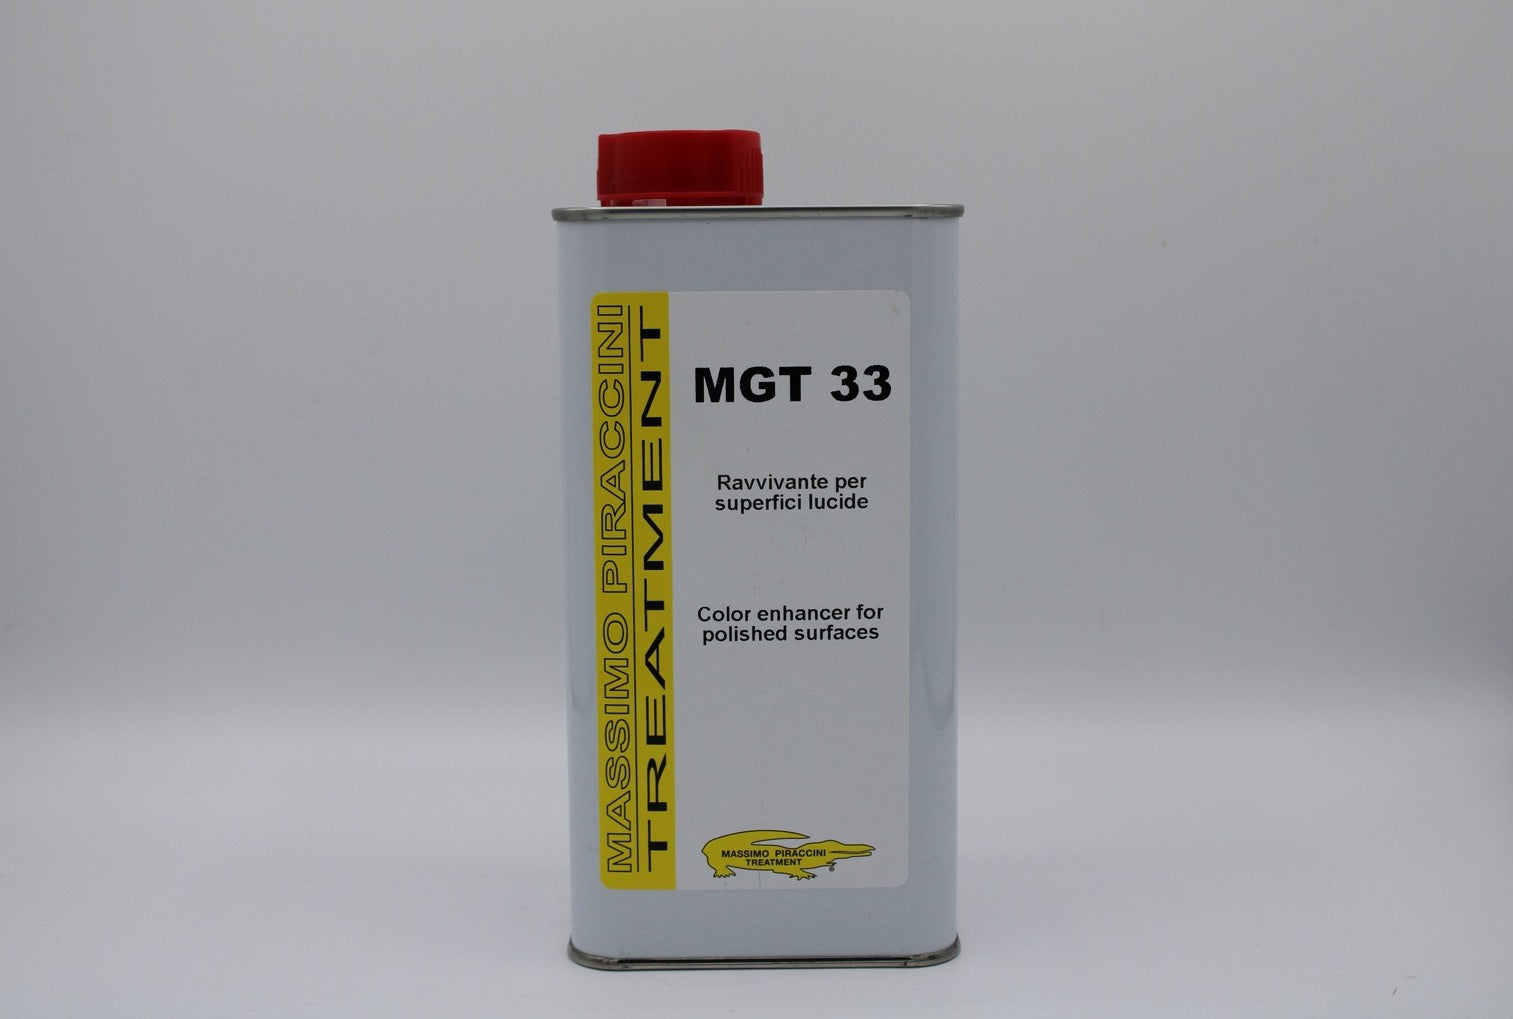 MGT 33 - Colour enhancer with wet effect, stain resistant, concentrated, and specific for polished surfaces